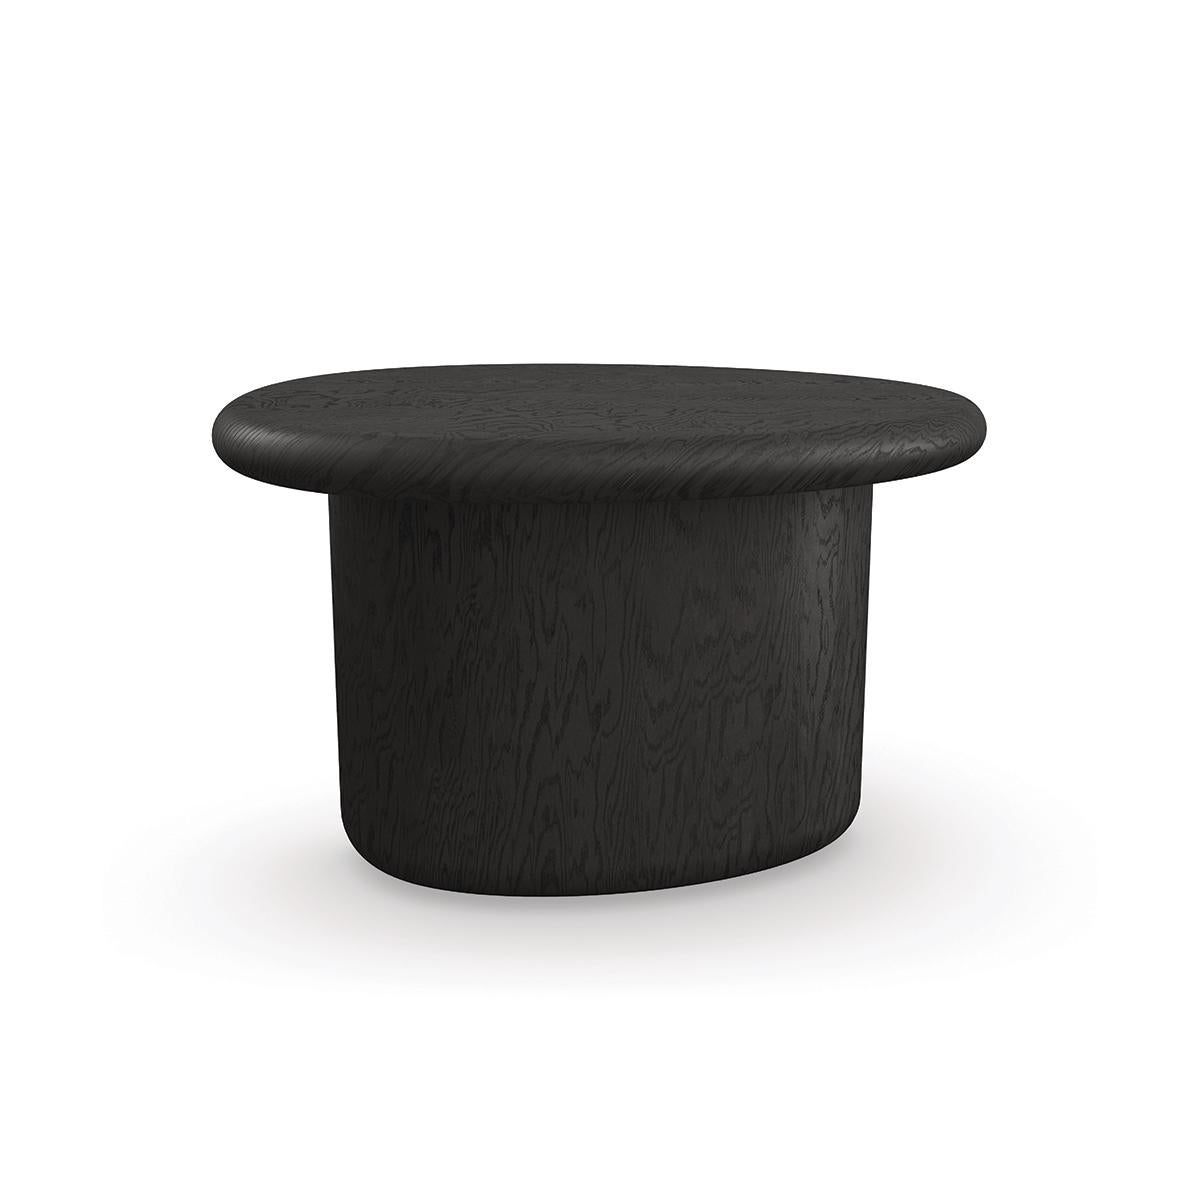 With its petite, pebble shape poised on a single curved foot, the table makes an organic yet elegant statement. Crafted in Tamo ash veneers and a dramatic dark coal finish, this versatile accent table is designed to complement our matching cocktail